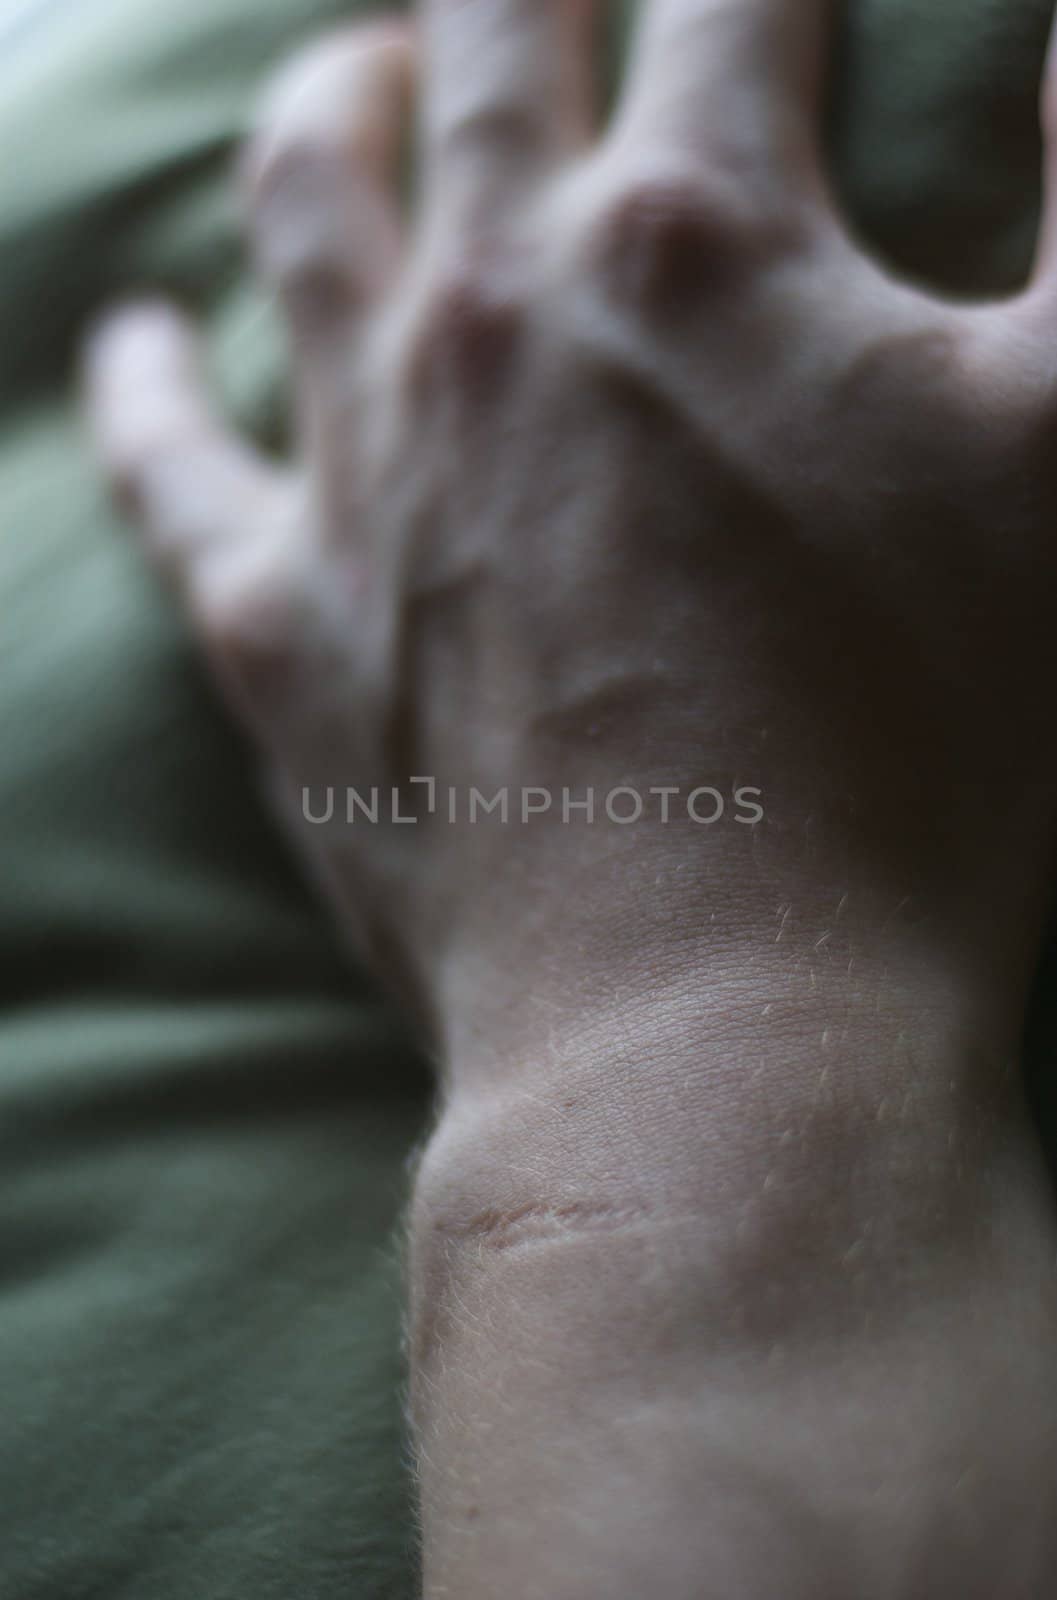 A vertical image of a scarred wrist and hand